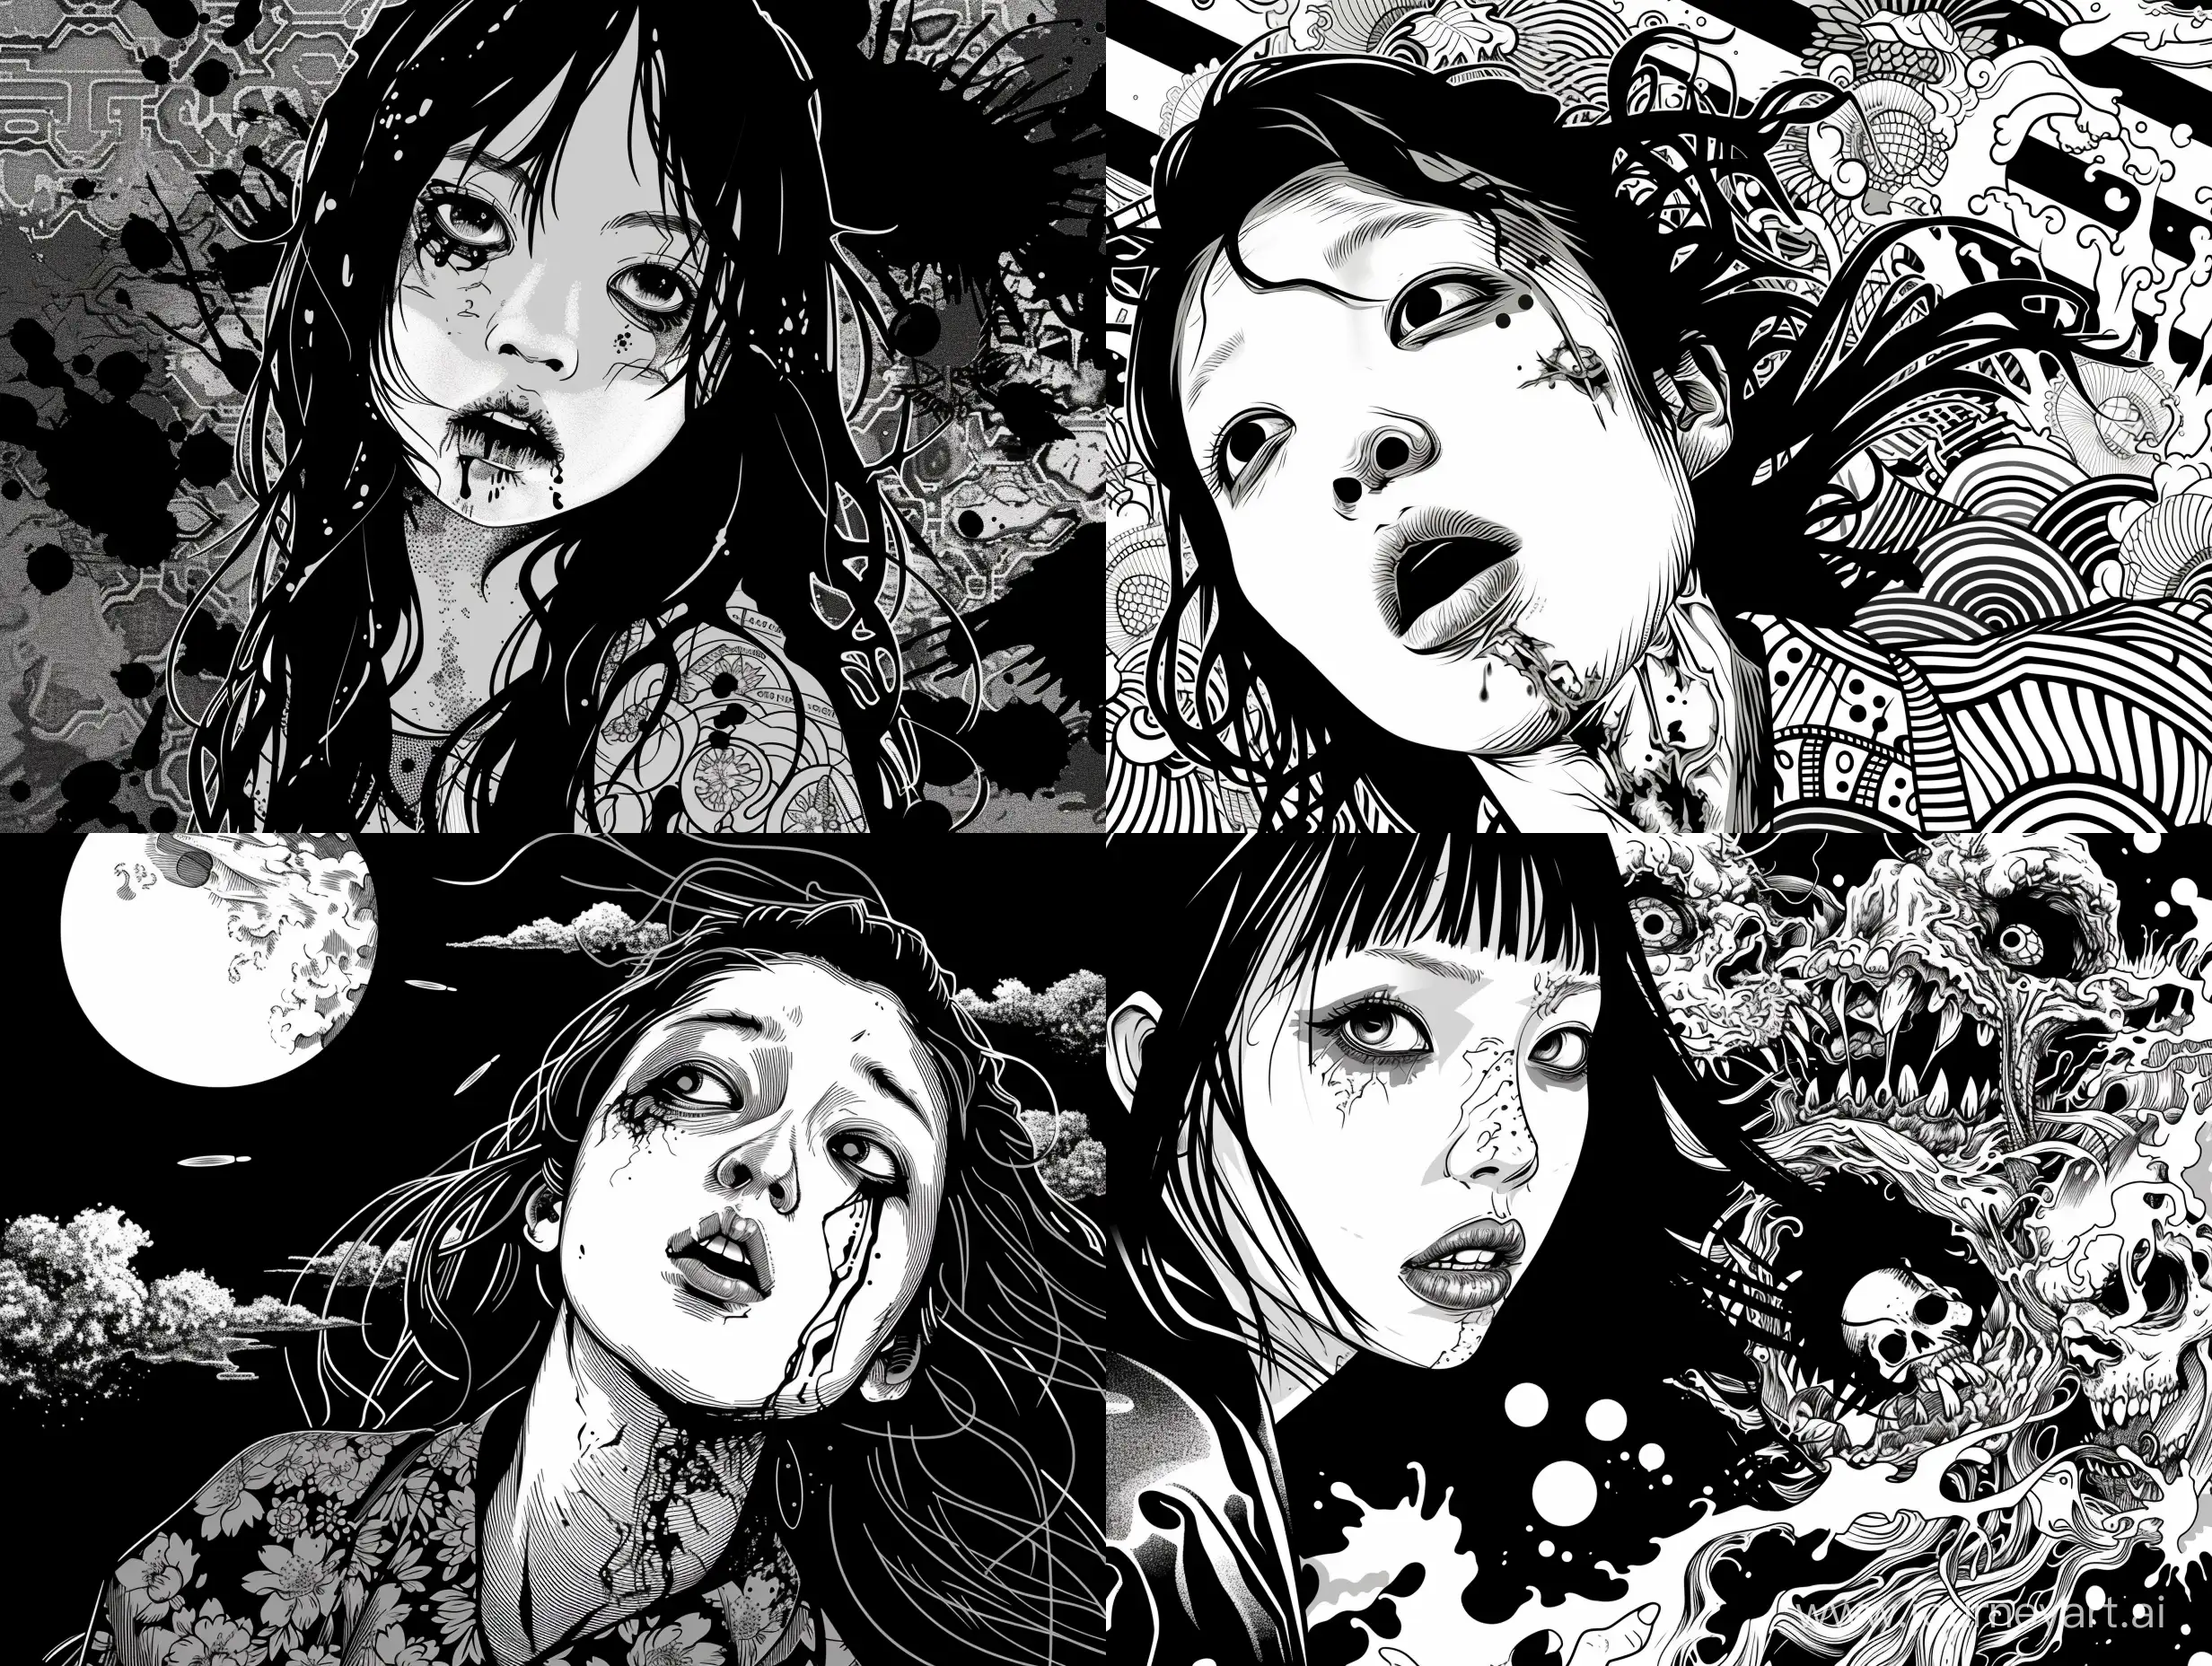 Eerie-Black-and-White-Japanese-Horror-Vector-Art-Haunting-Woman-and-Zombie